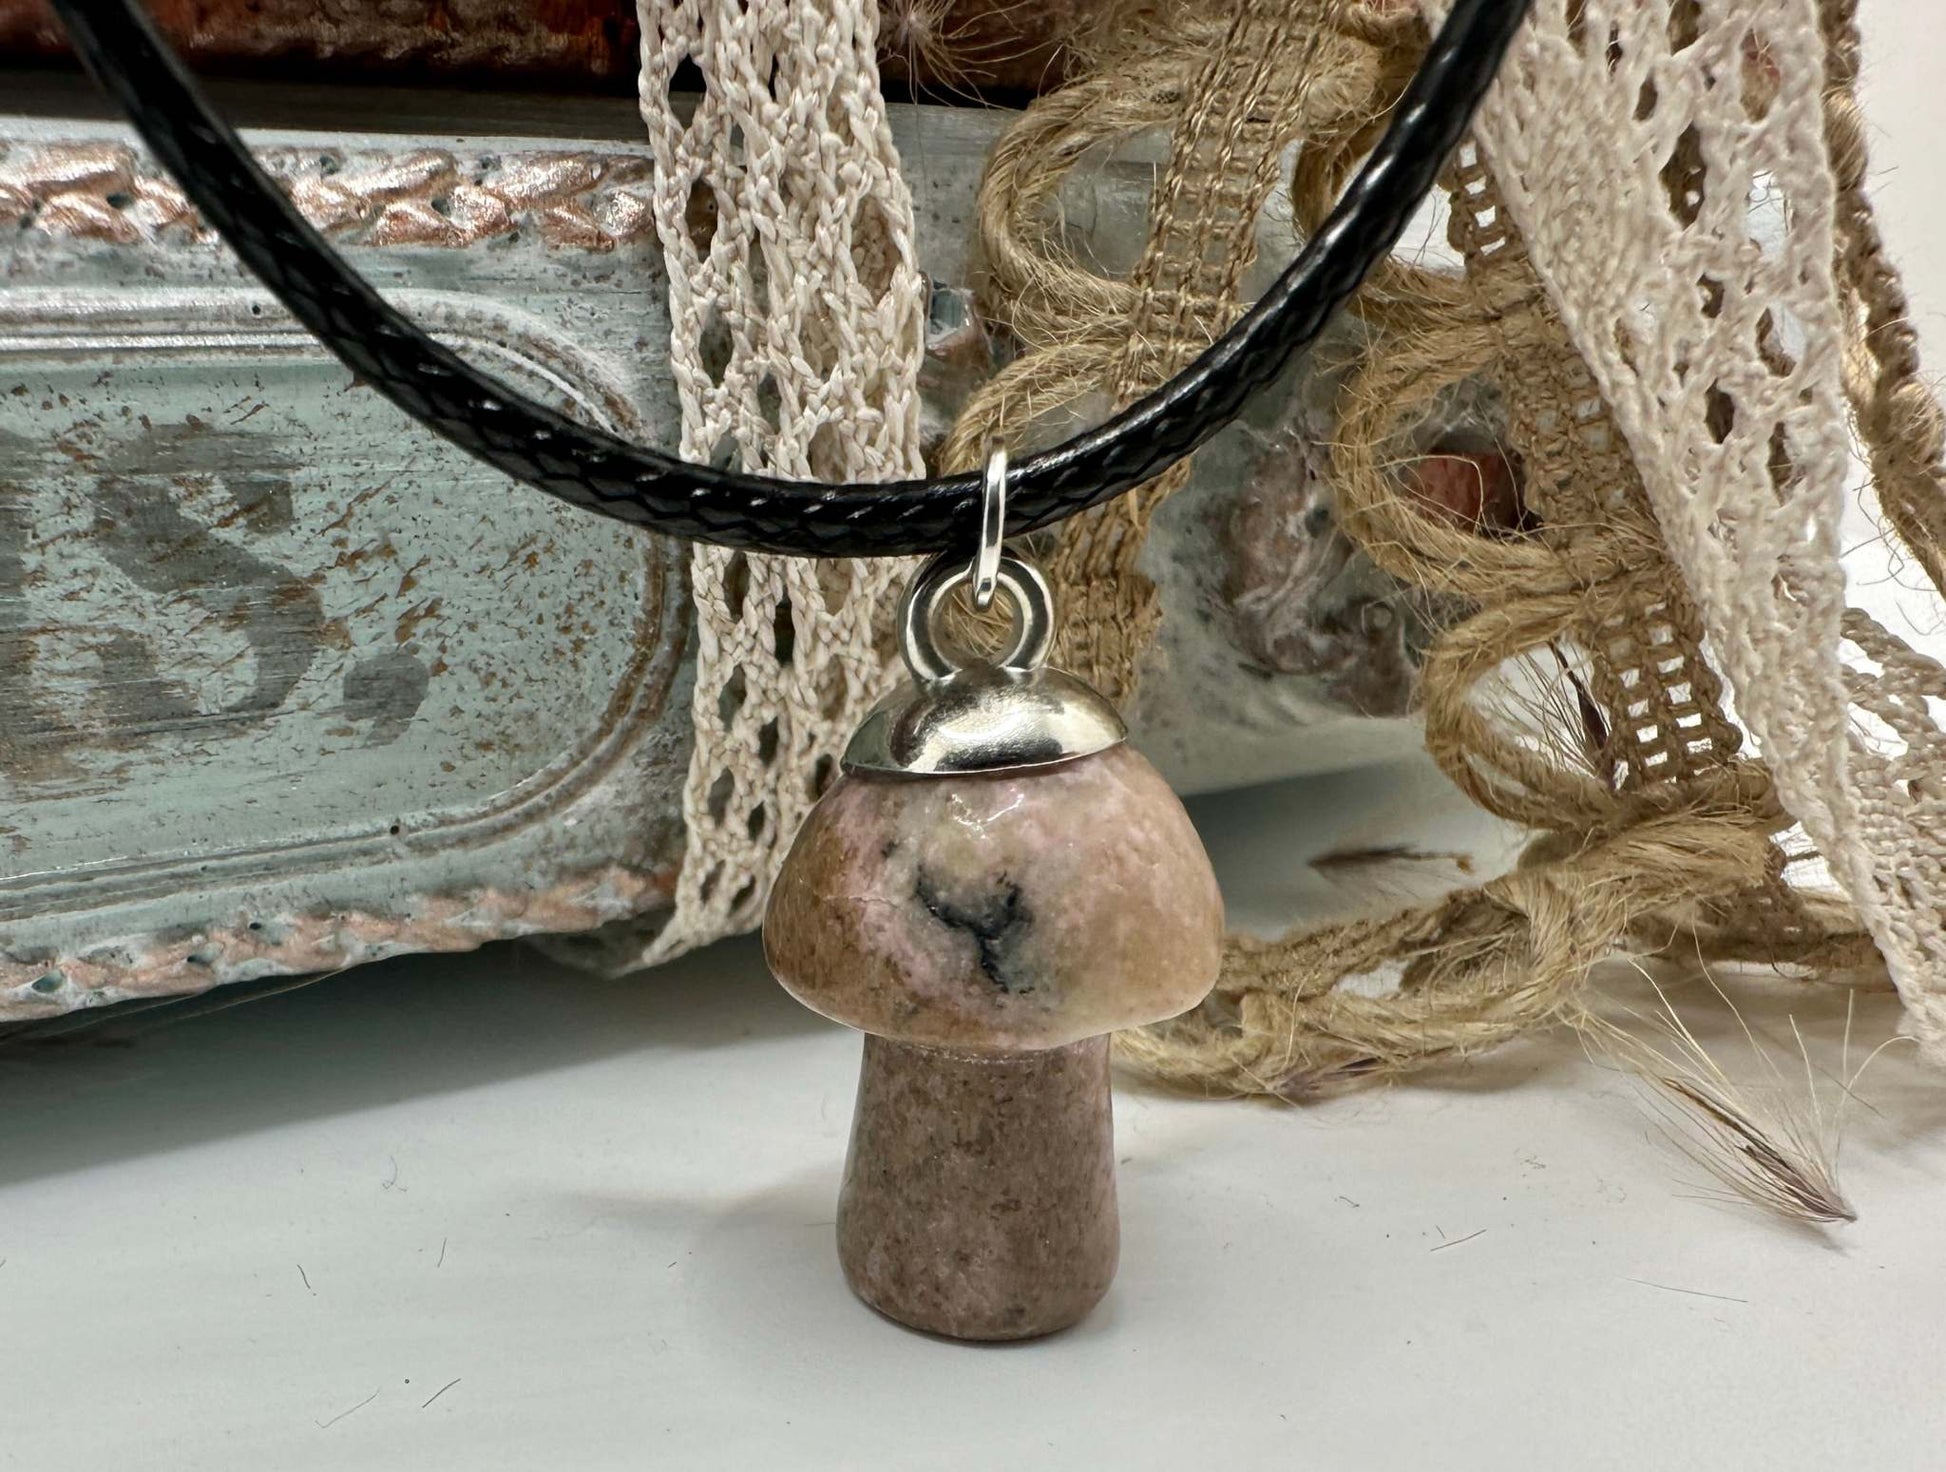 A Rhyolite mushroom shaped gemstone necklace hangs from a black leather cord